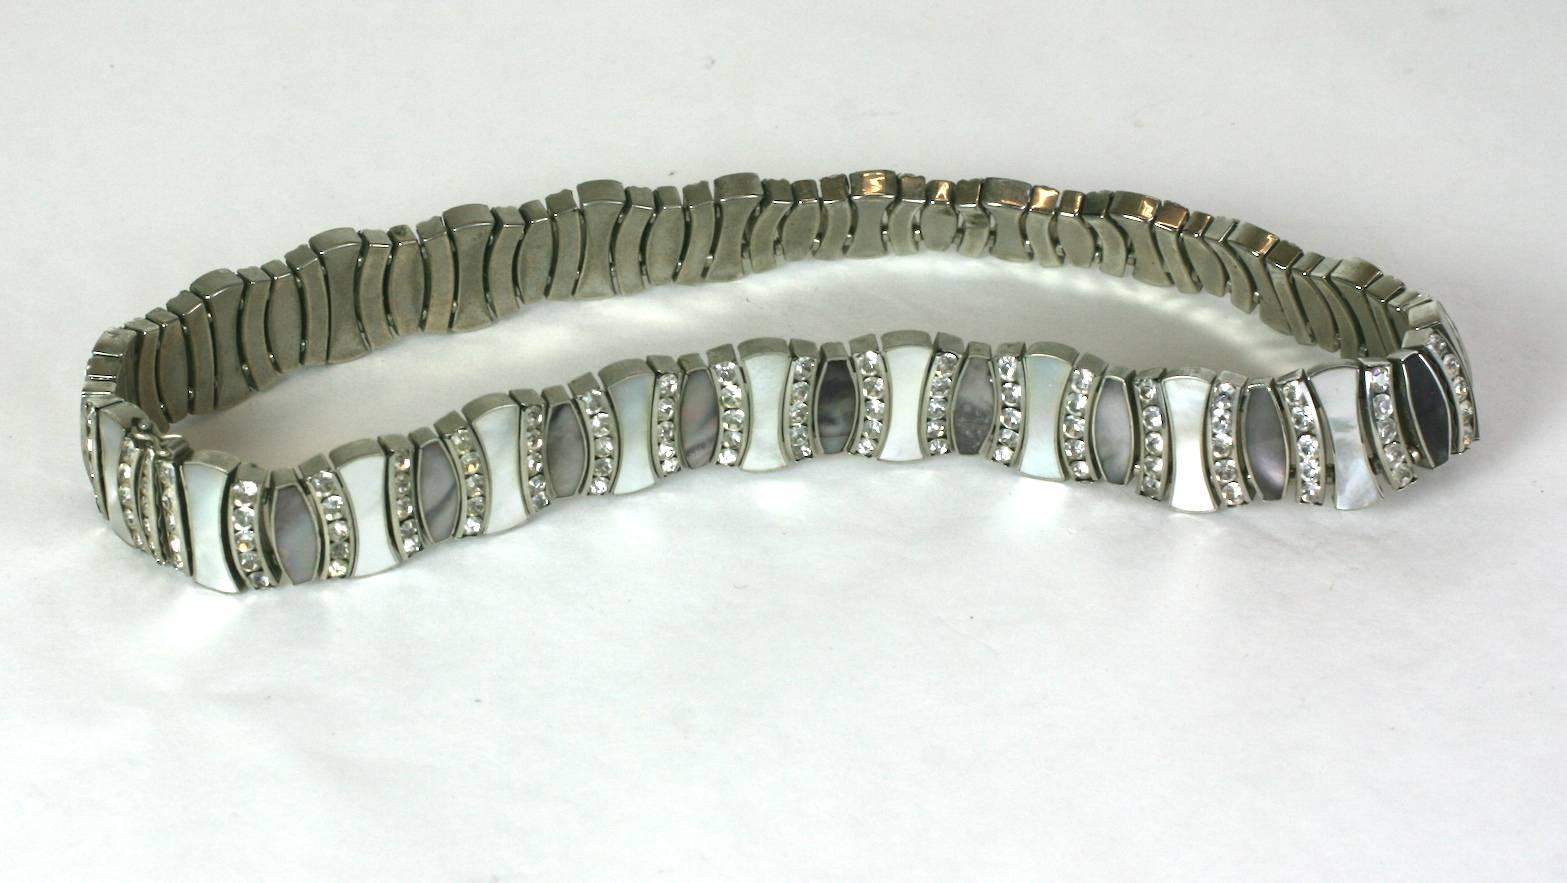 Lovely mid Century Mother of Pearl and Pave Choker of dark and white mother of pearl ovoid panels separated by channel set pave rhinestones. Lovely quality and construction. 
West Germany, 1950's.
14.75" x .75". 